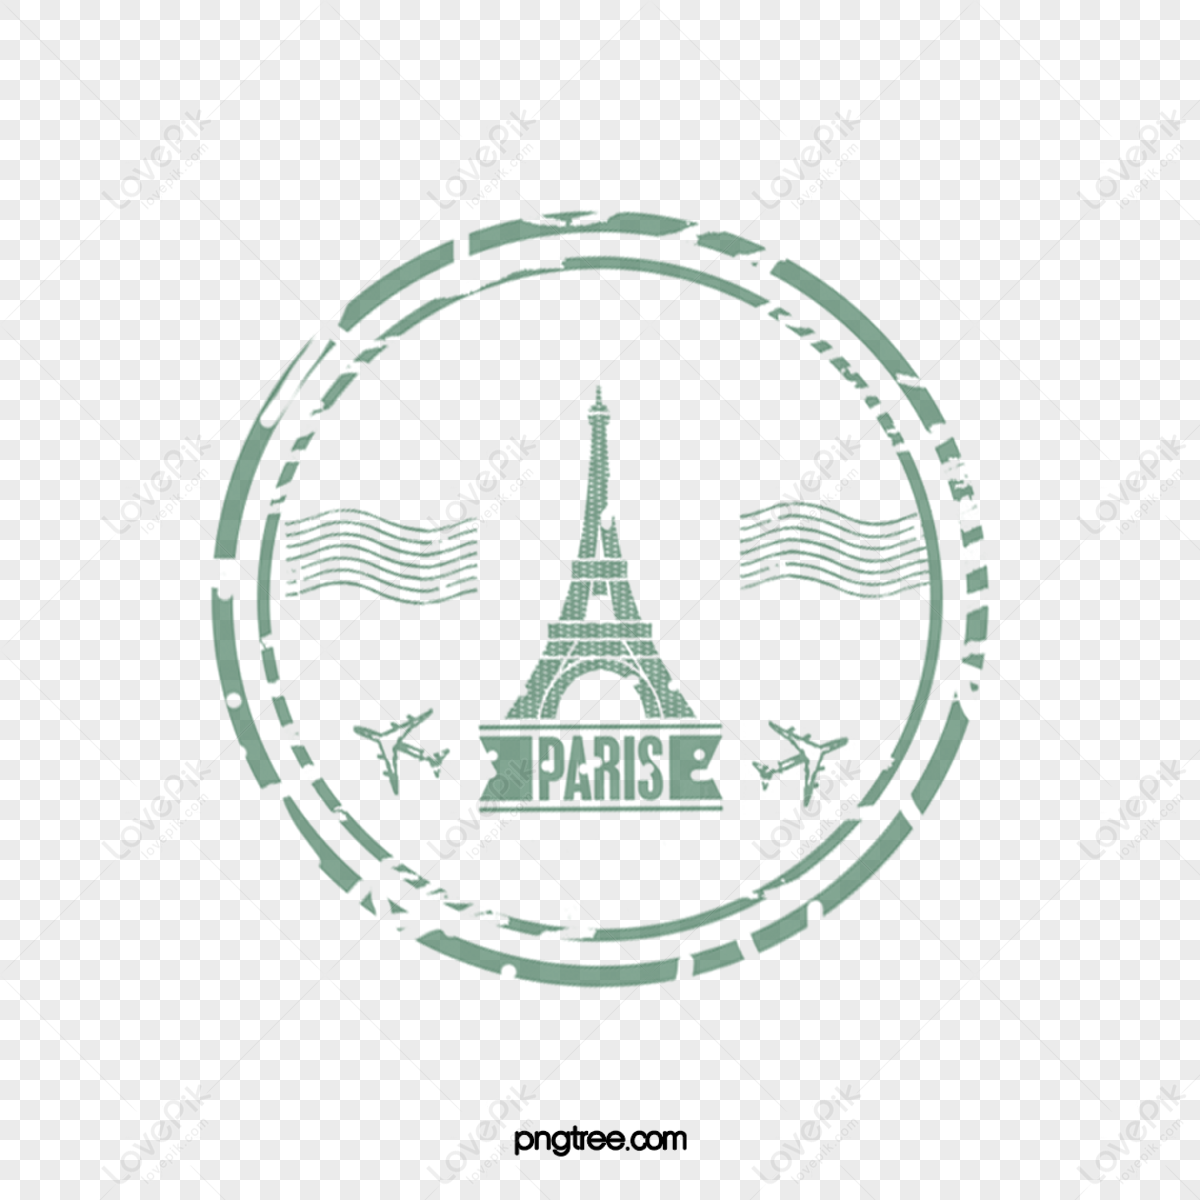 Eiffel Tower seal retro scenic point postmark,vintage style,attractions postmark png hd transparent image